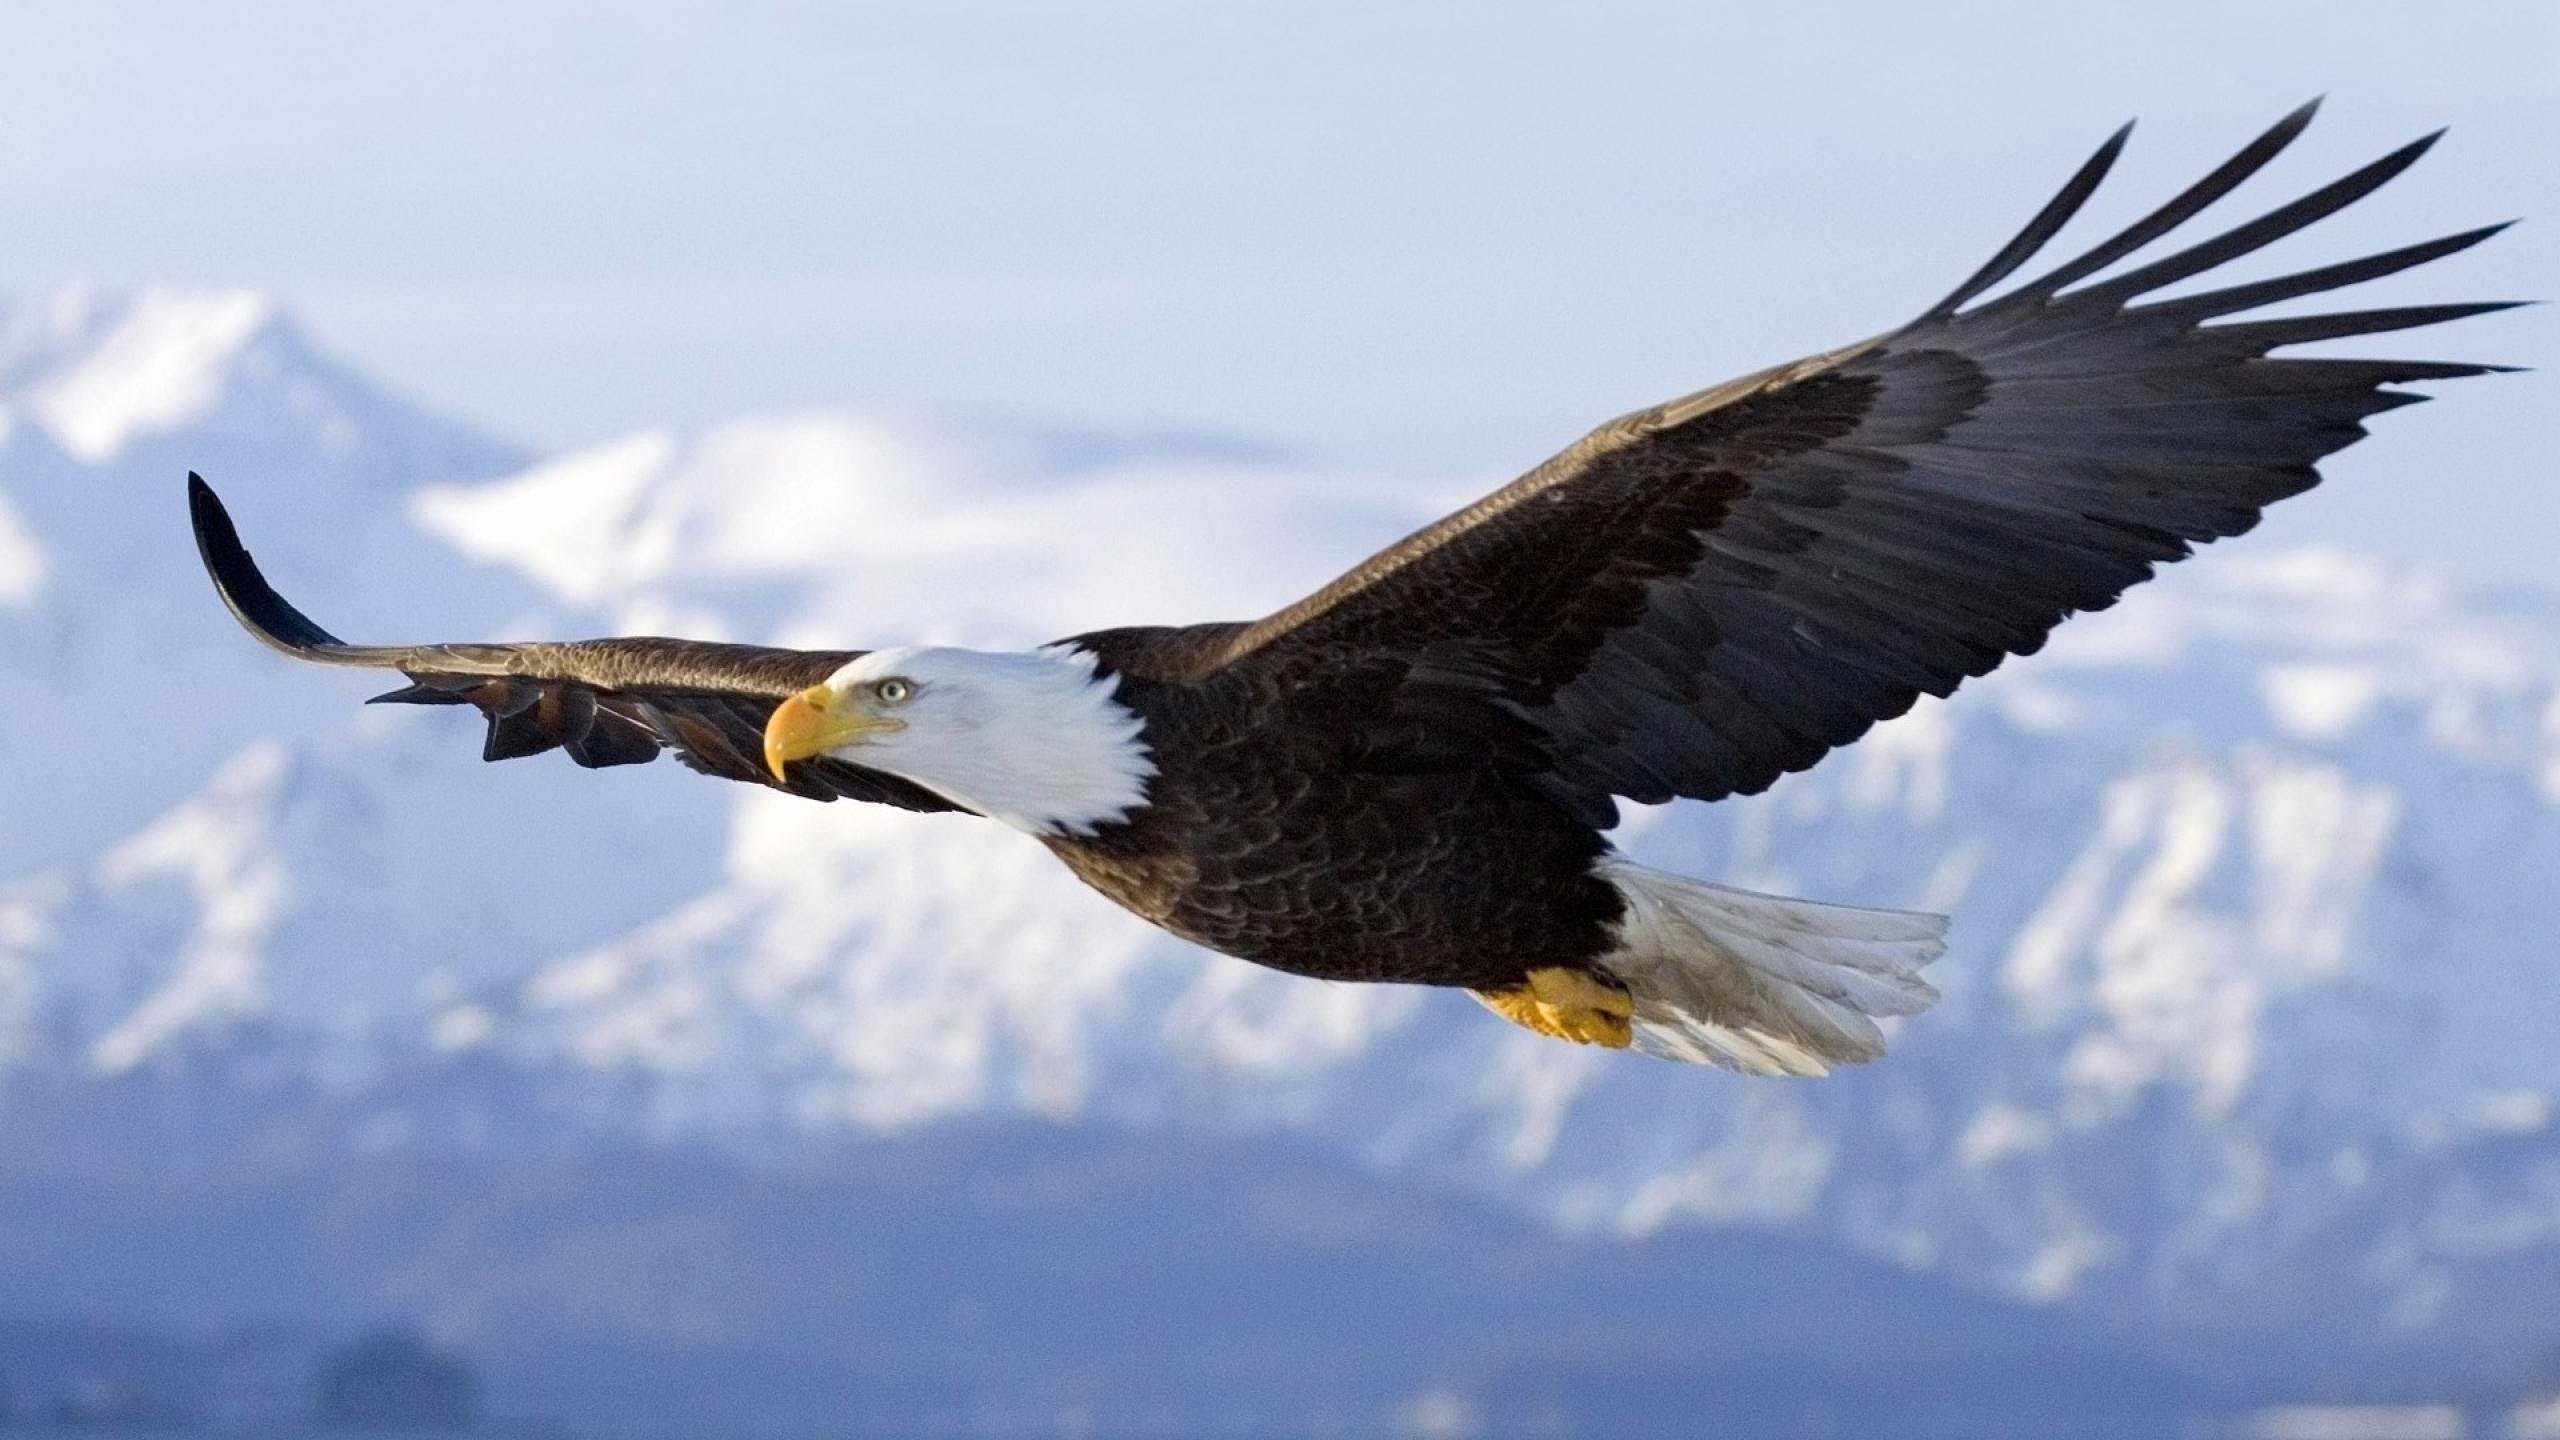 General 2560x1440 animals bald eagle birds wings flying closeup